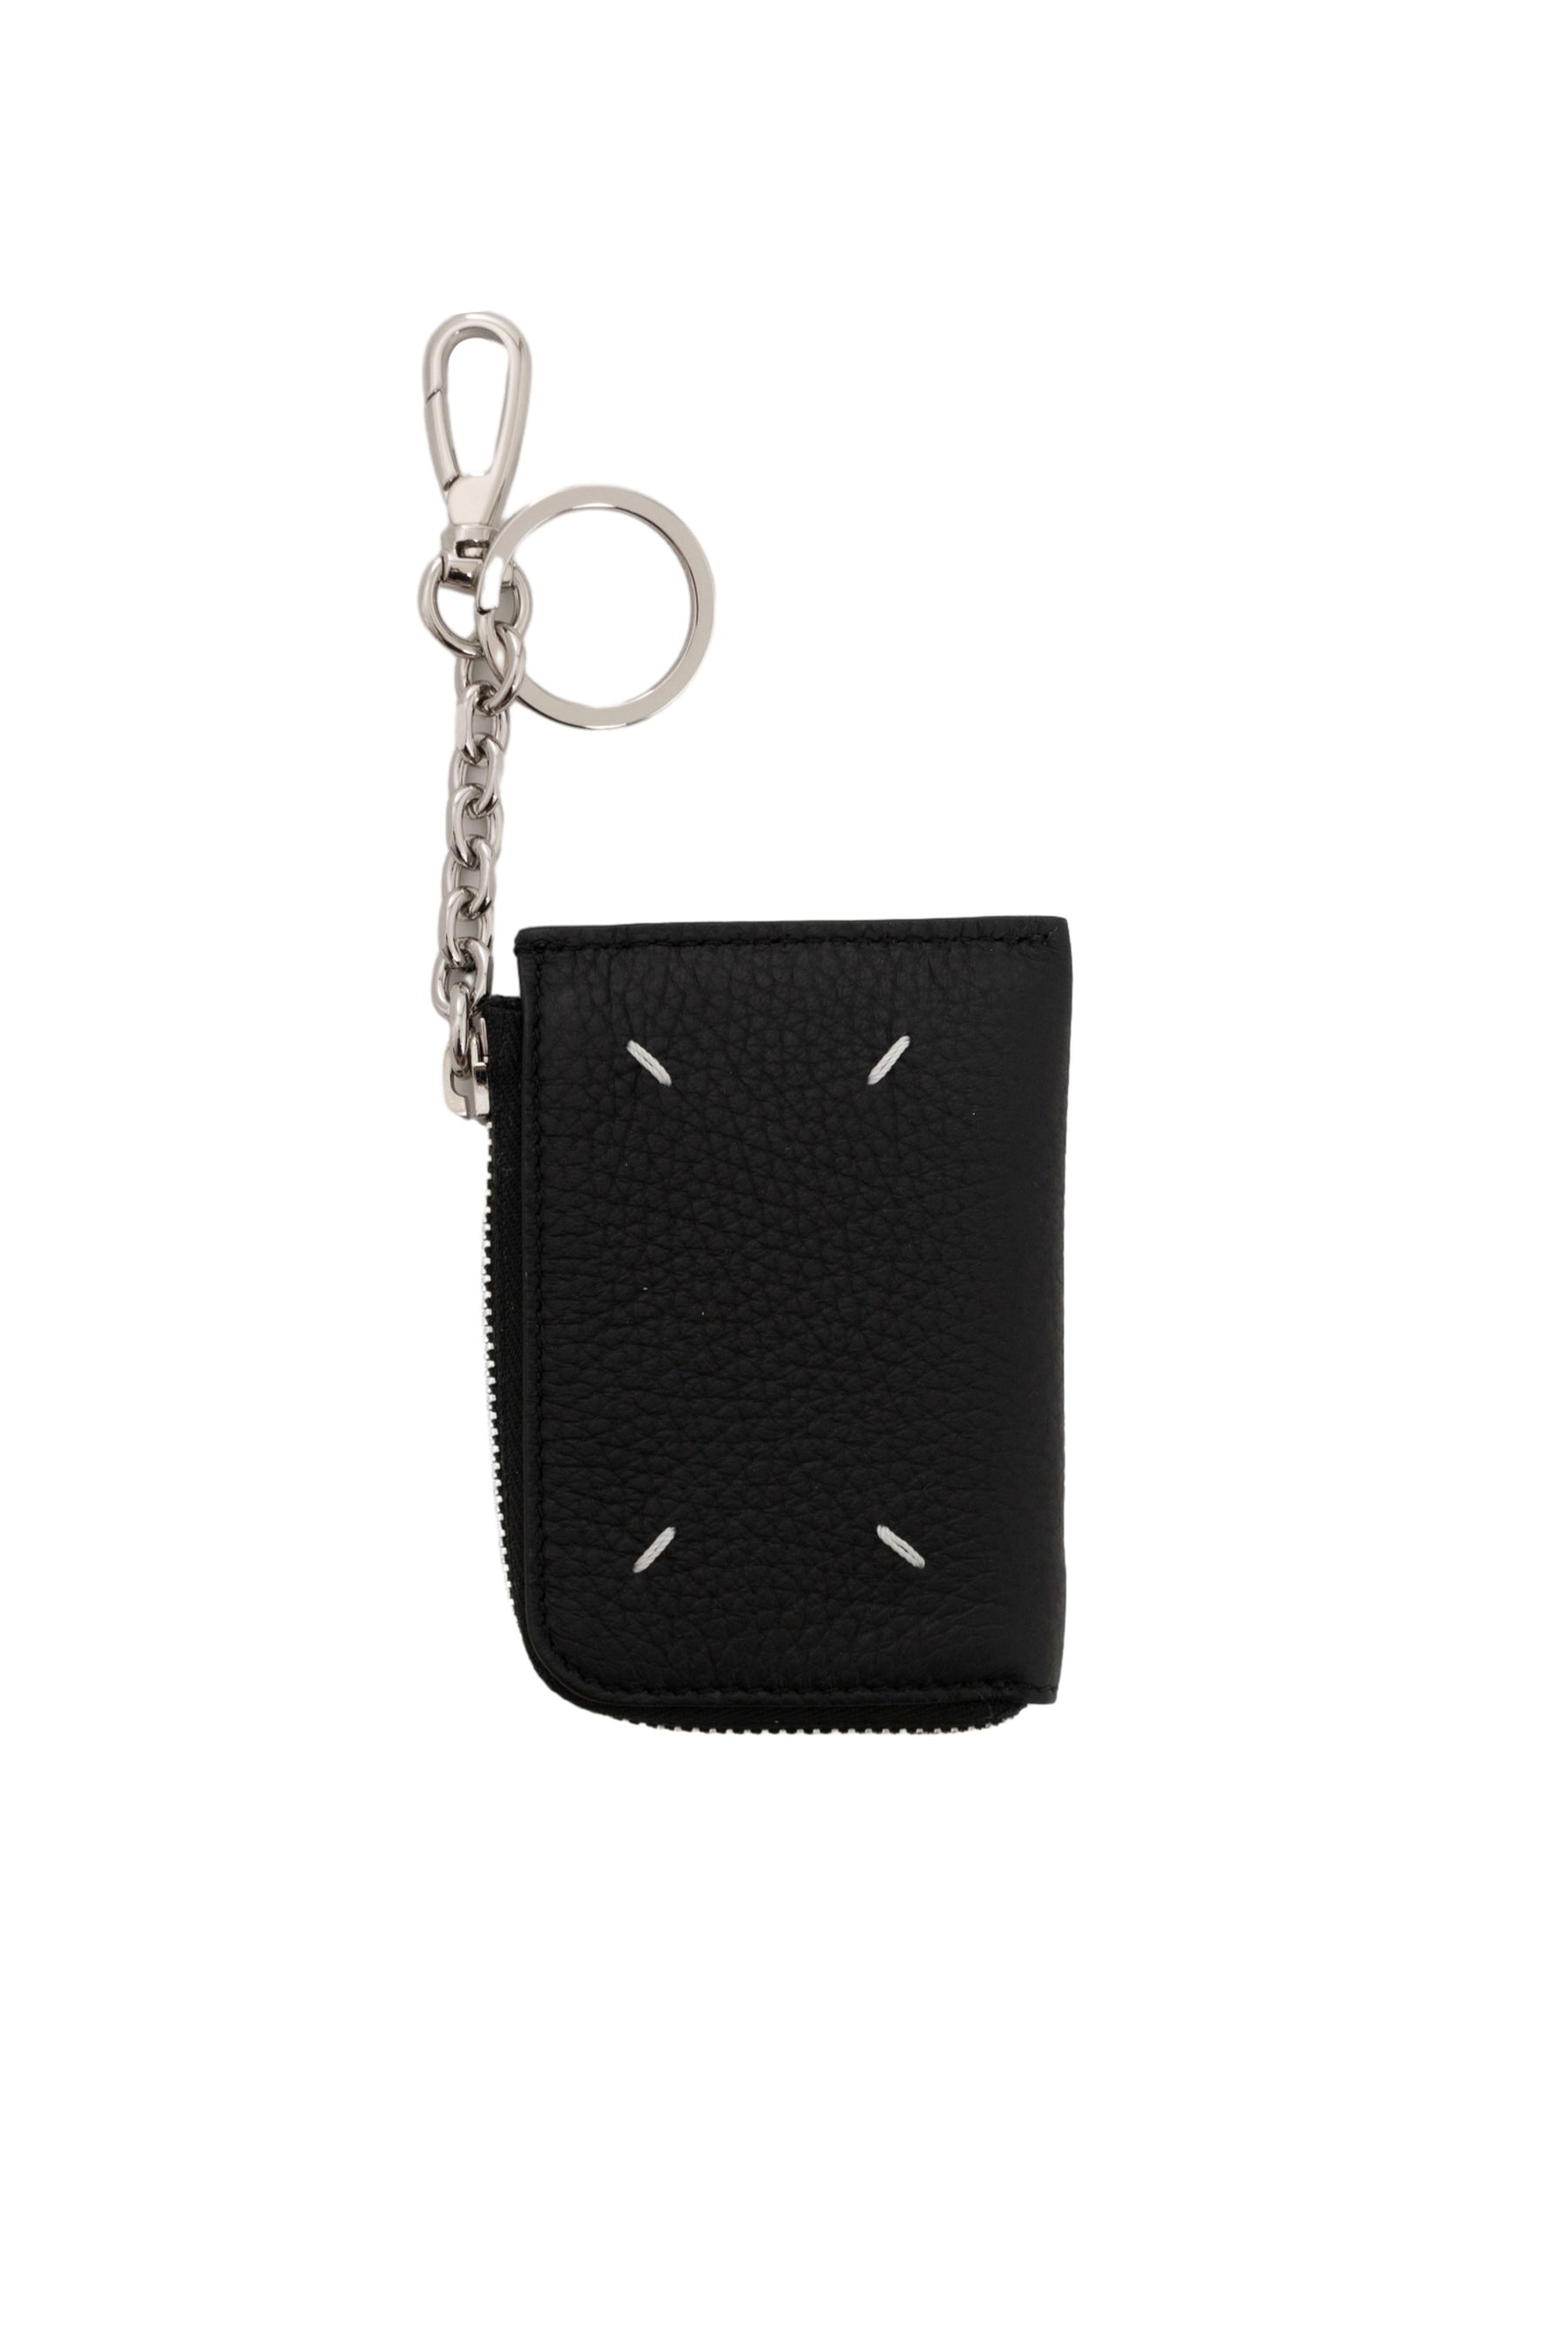 Popular SLGs - Card holders, key pouch and 6 ring key holder from